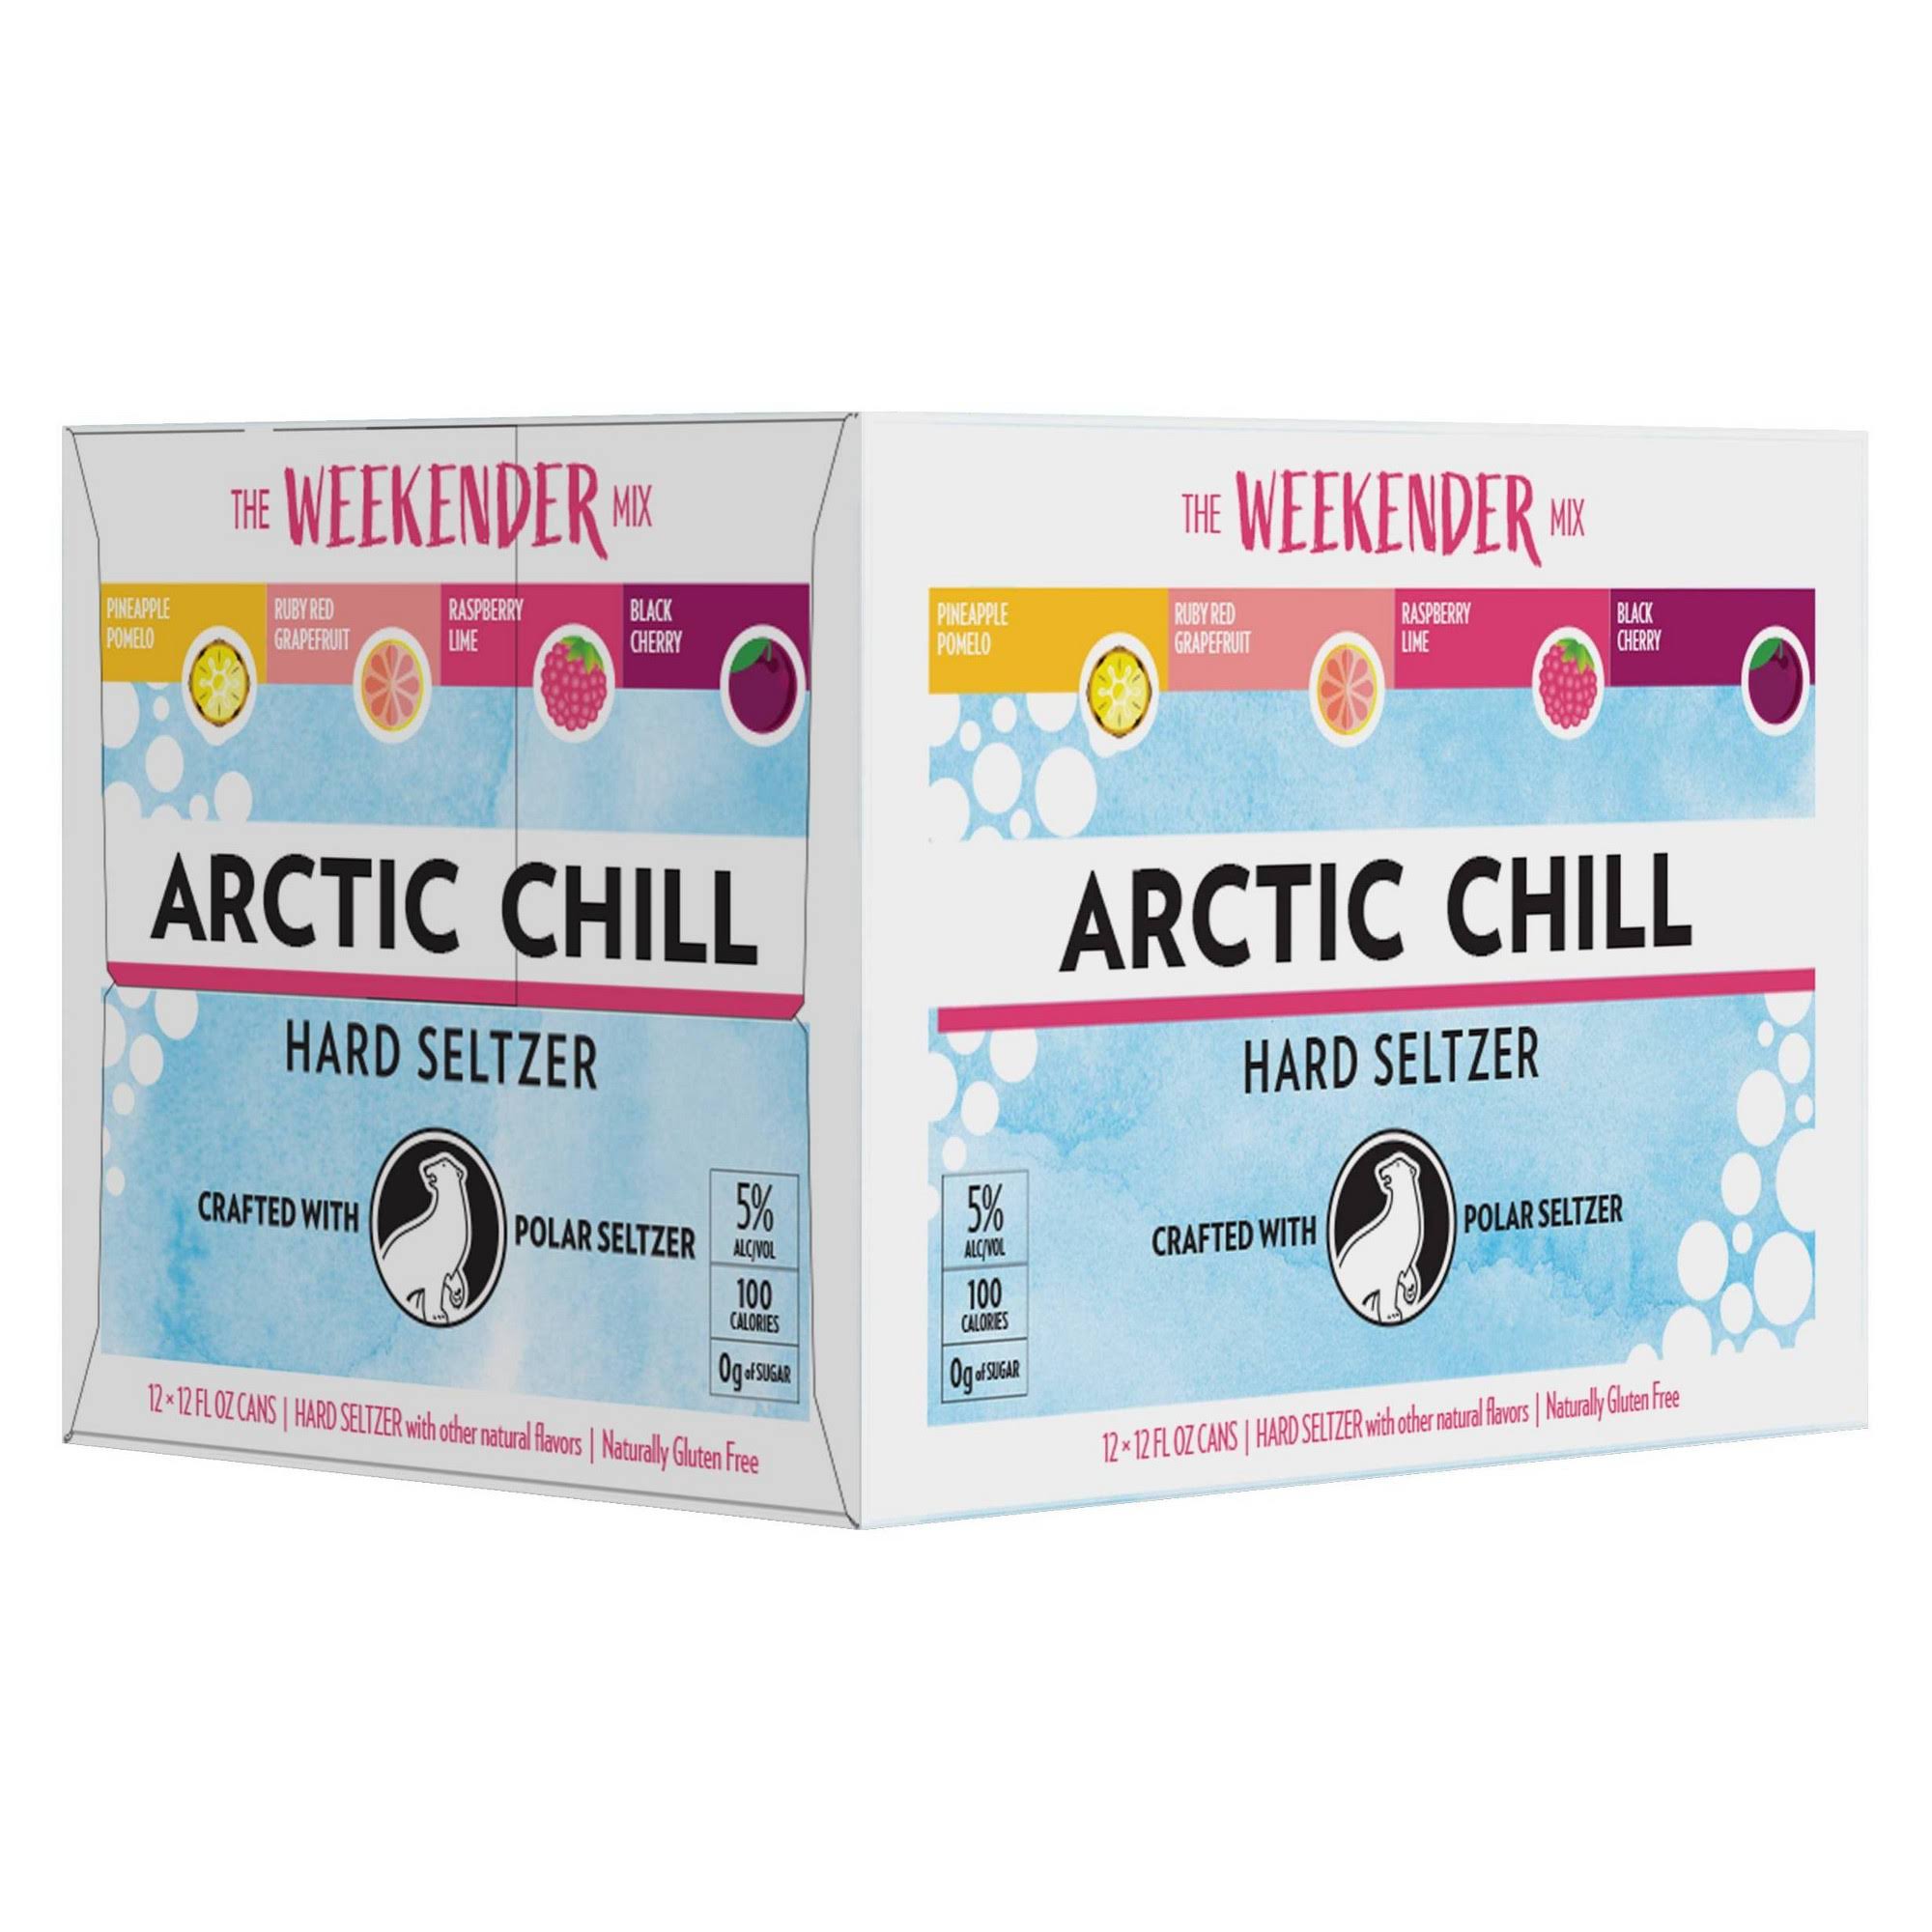 Arctic Chill Hard Seltzer, The Weekender Mix, 12 Pack - 12 pack, 12 fl oz cans